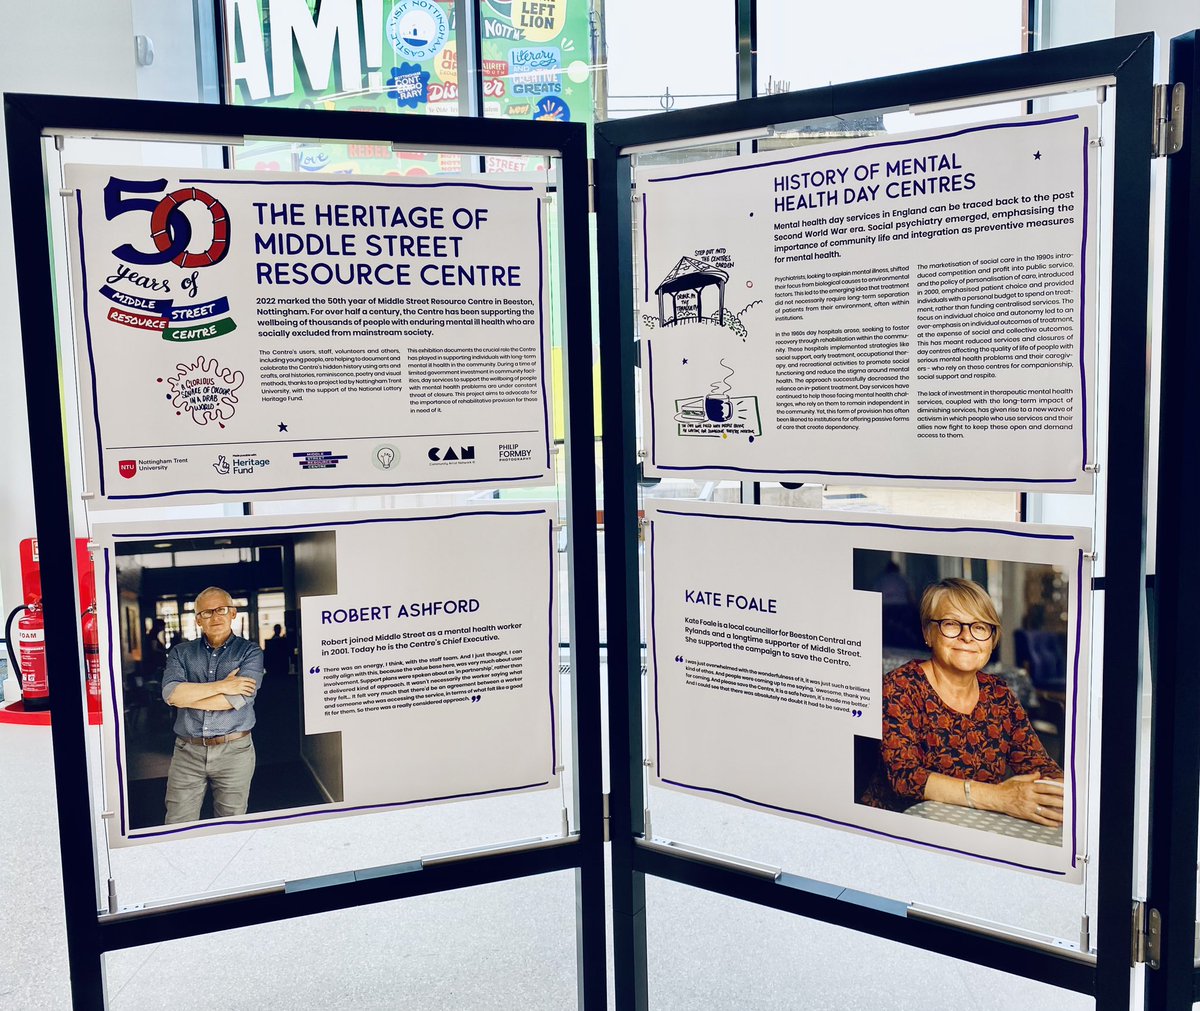 sneak preview of the Heritage of Middle Street Resource Centre exhibition opening 2mrw at Nottingham Central Library. It explores 50 years of social history of a mental health day centre through oral histories, memory boxes & more @HealthMemories @NottmLibraries @ntu_research